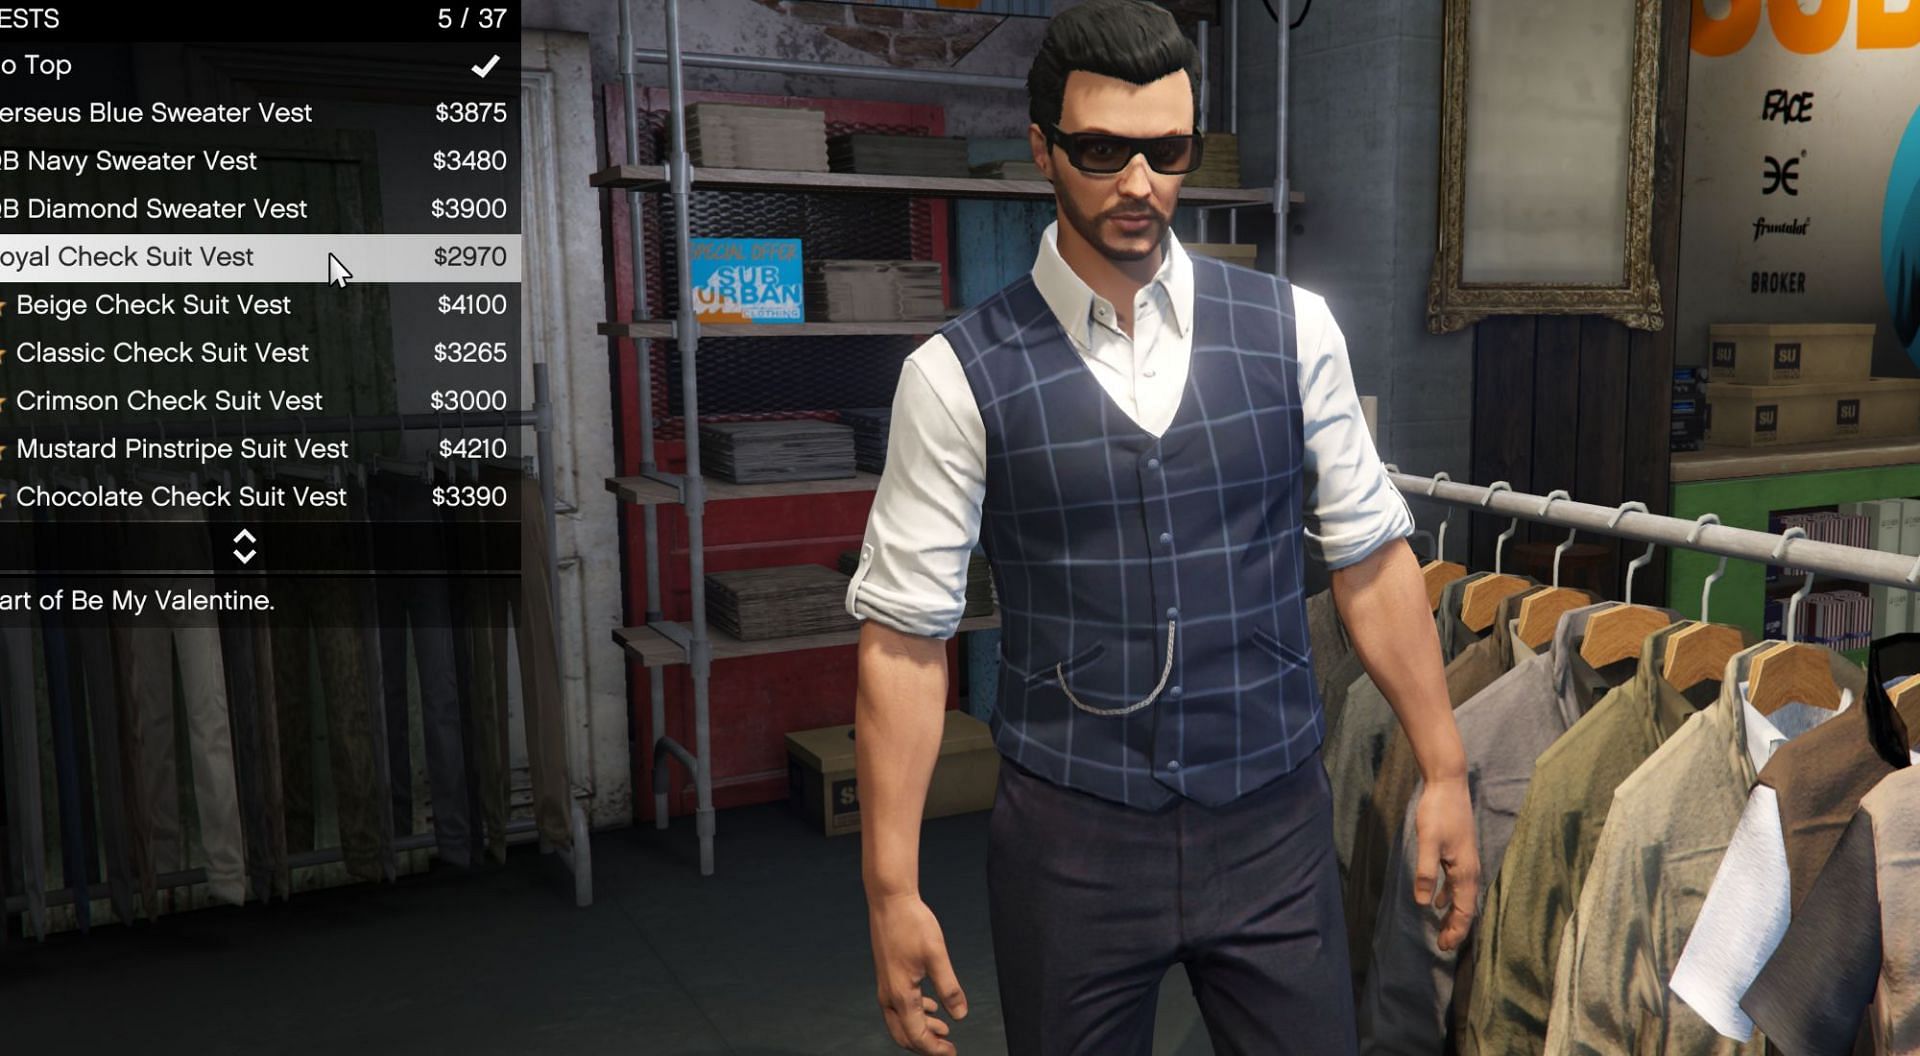 Plus subscription will automatically add new clothes to the wardrobe (Image by I_Soumajit)